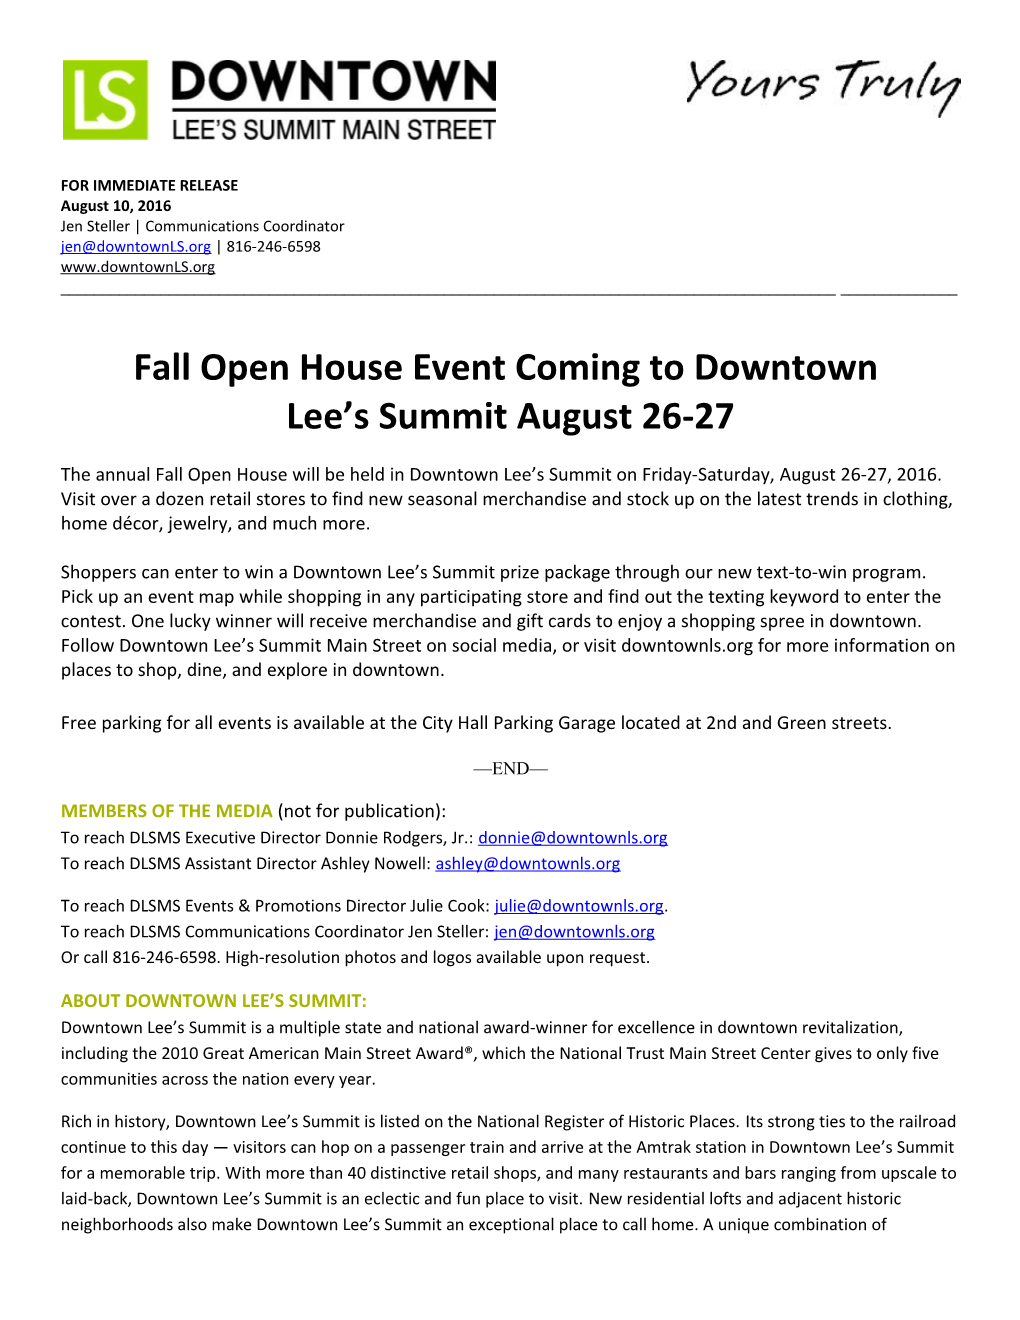 Fall Open House Event Coming to Downtown